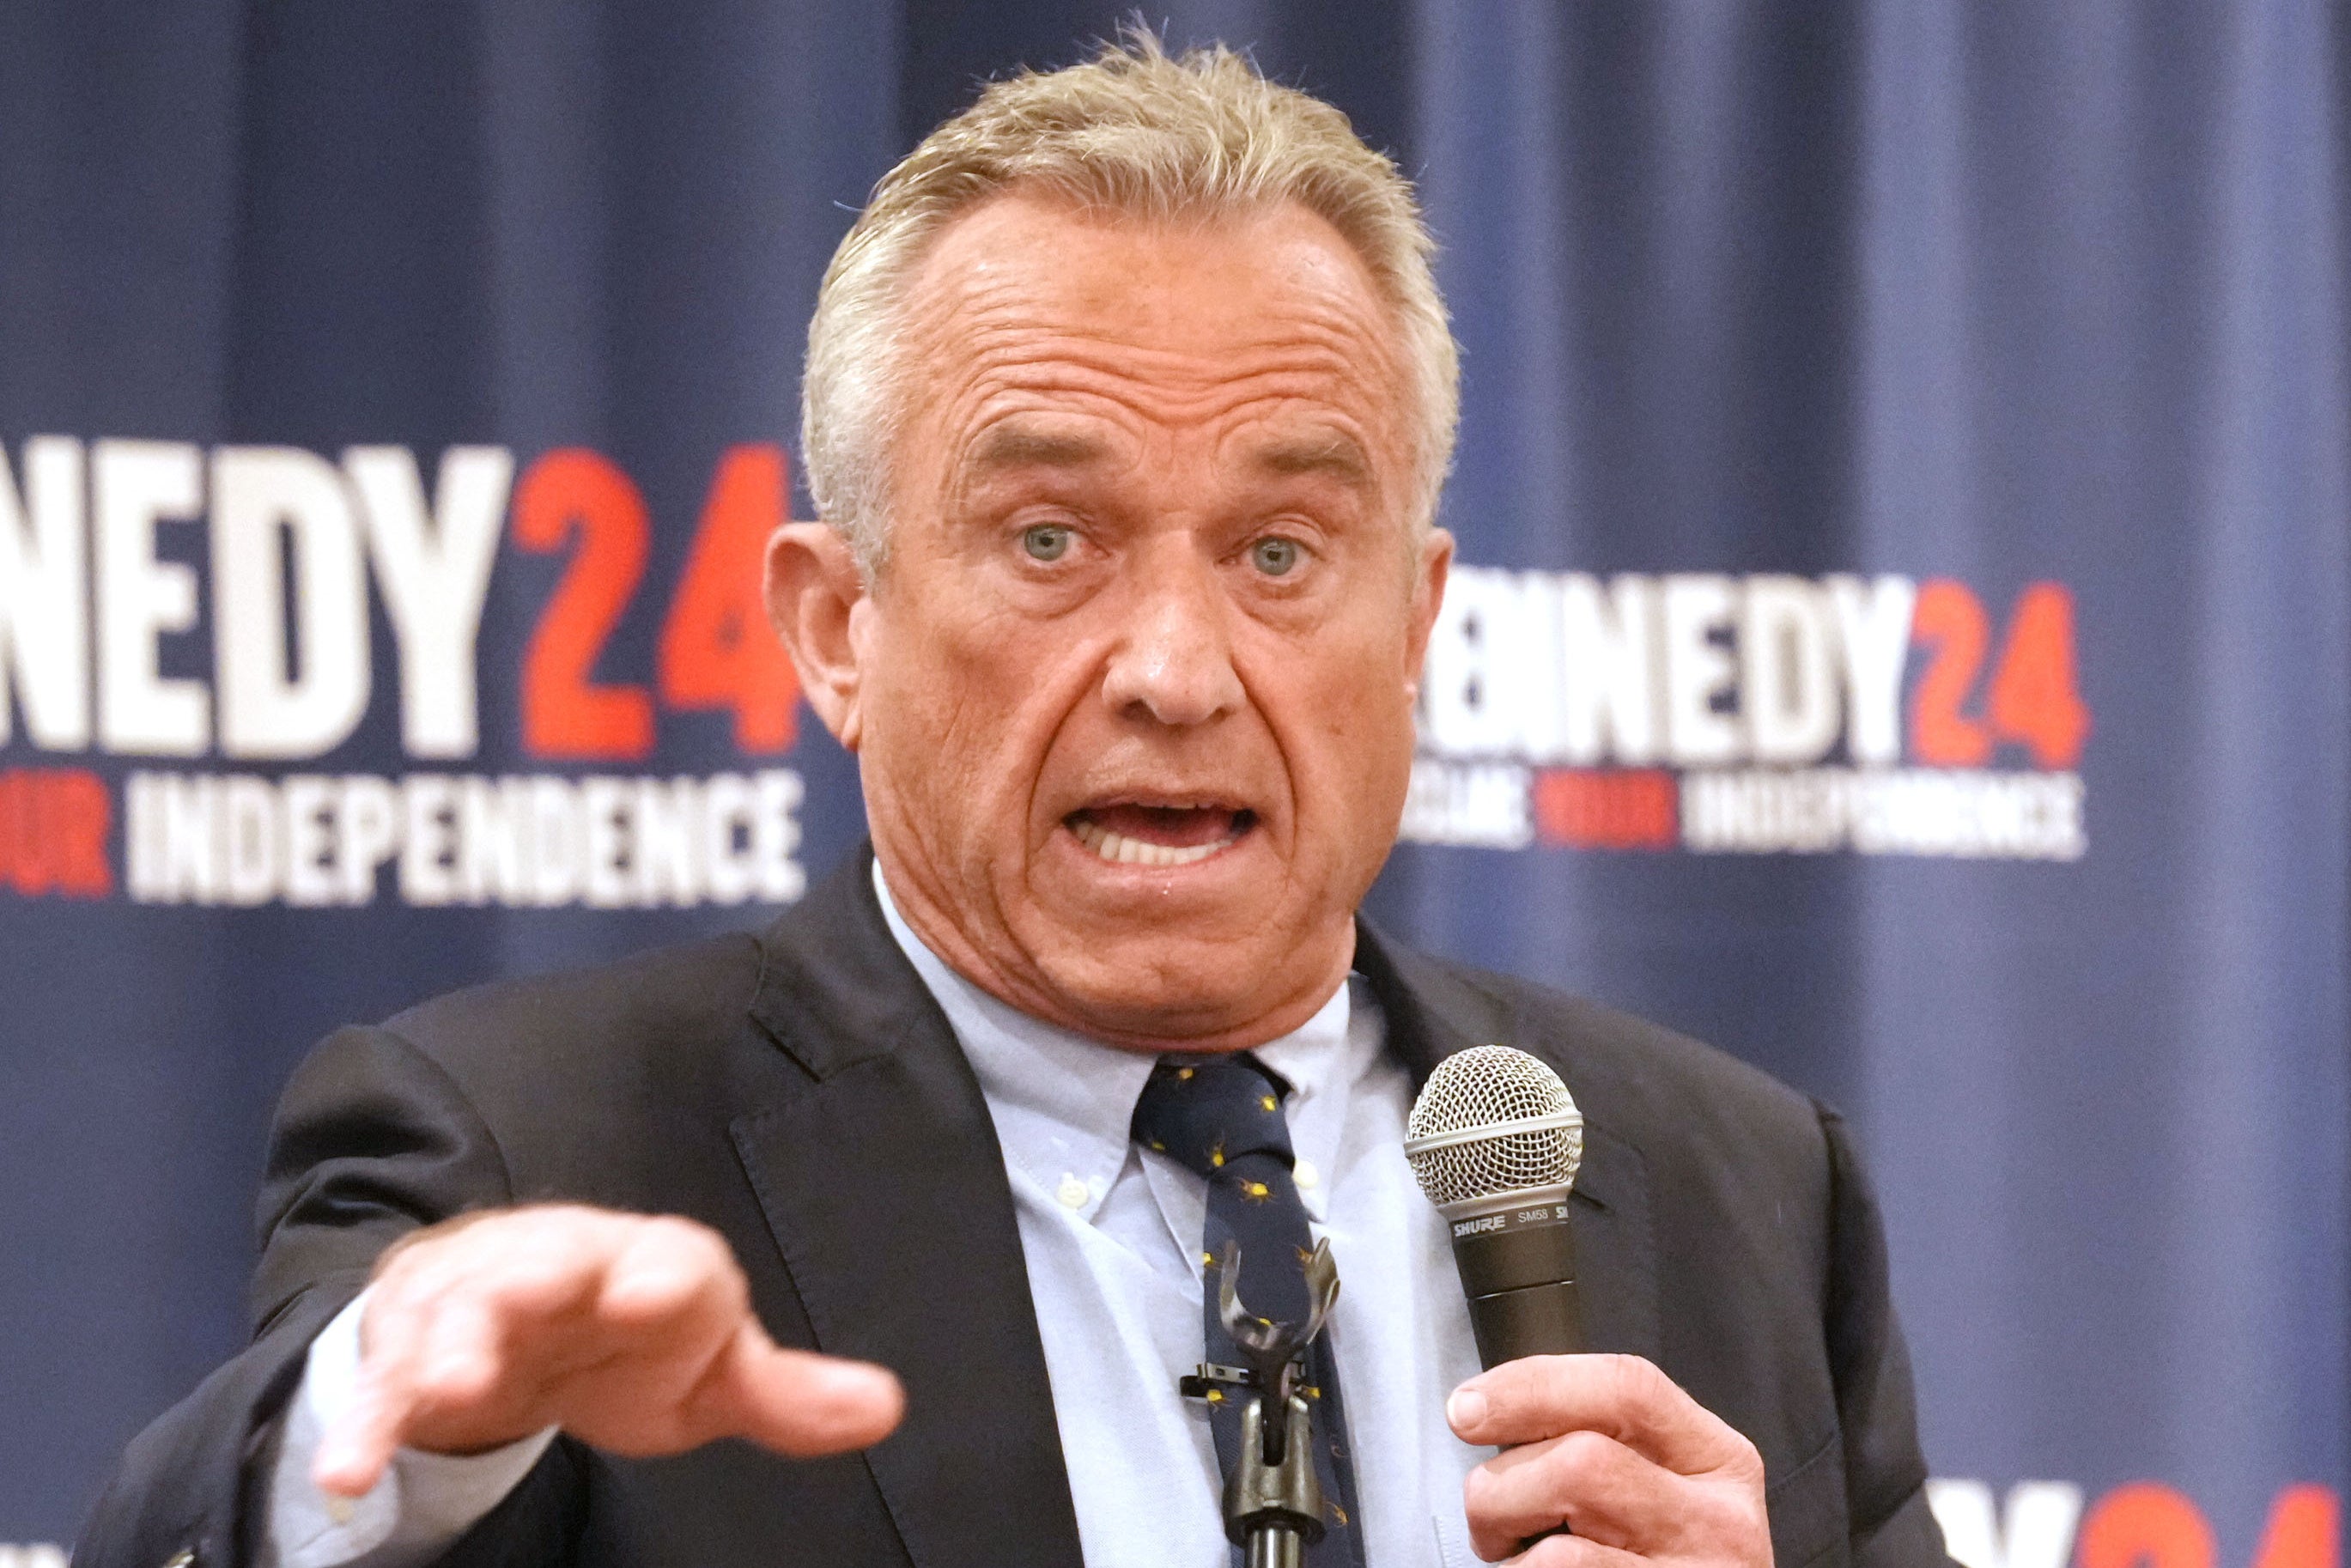 Robert F Kennedy Jr is attracting the highest support for a third party party or independent candidate in decades